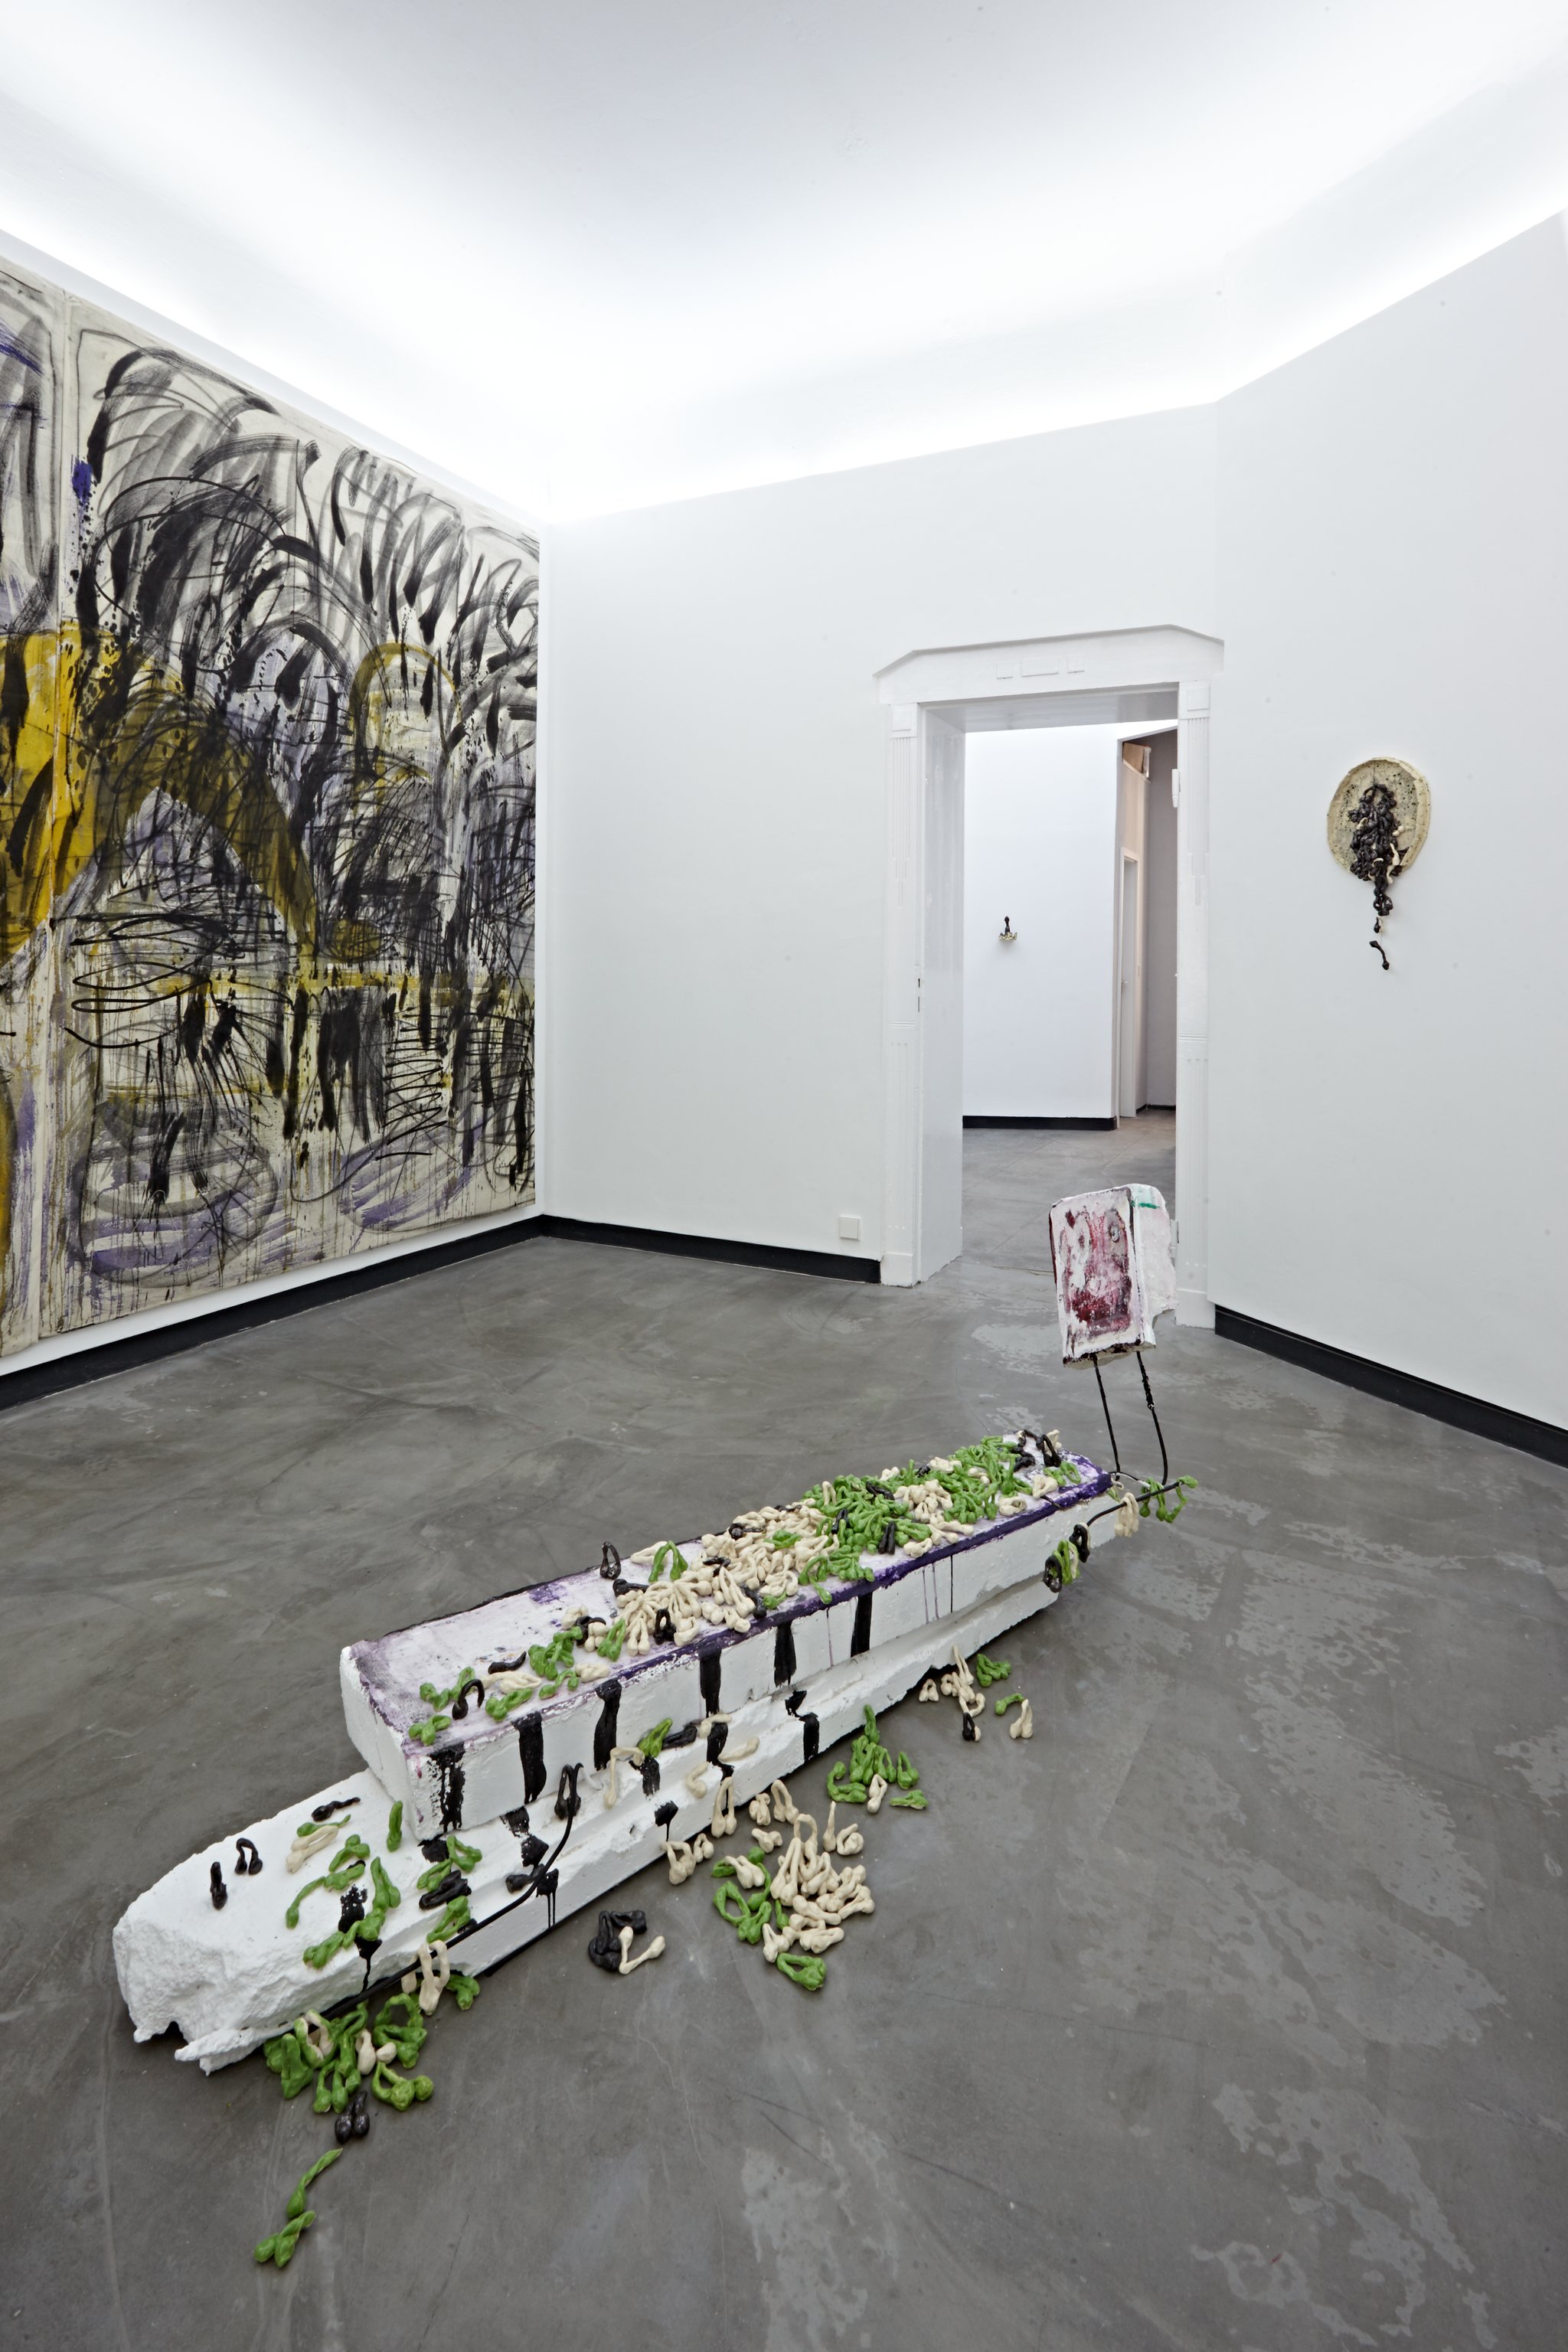 Ali Altin, Sophia Domagala, Installation views from "Stupidity Is Not Home"